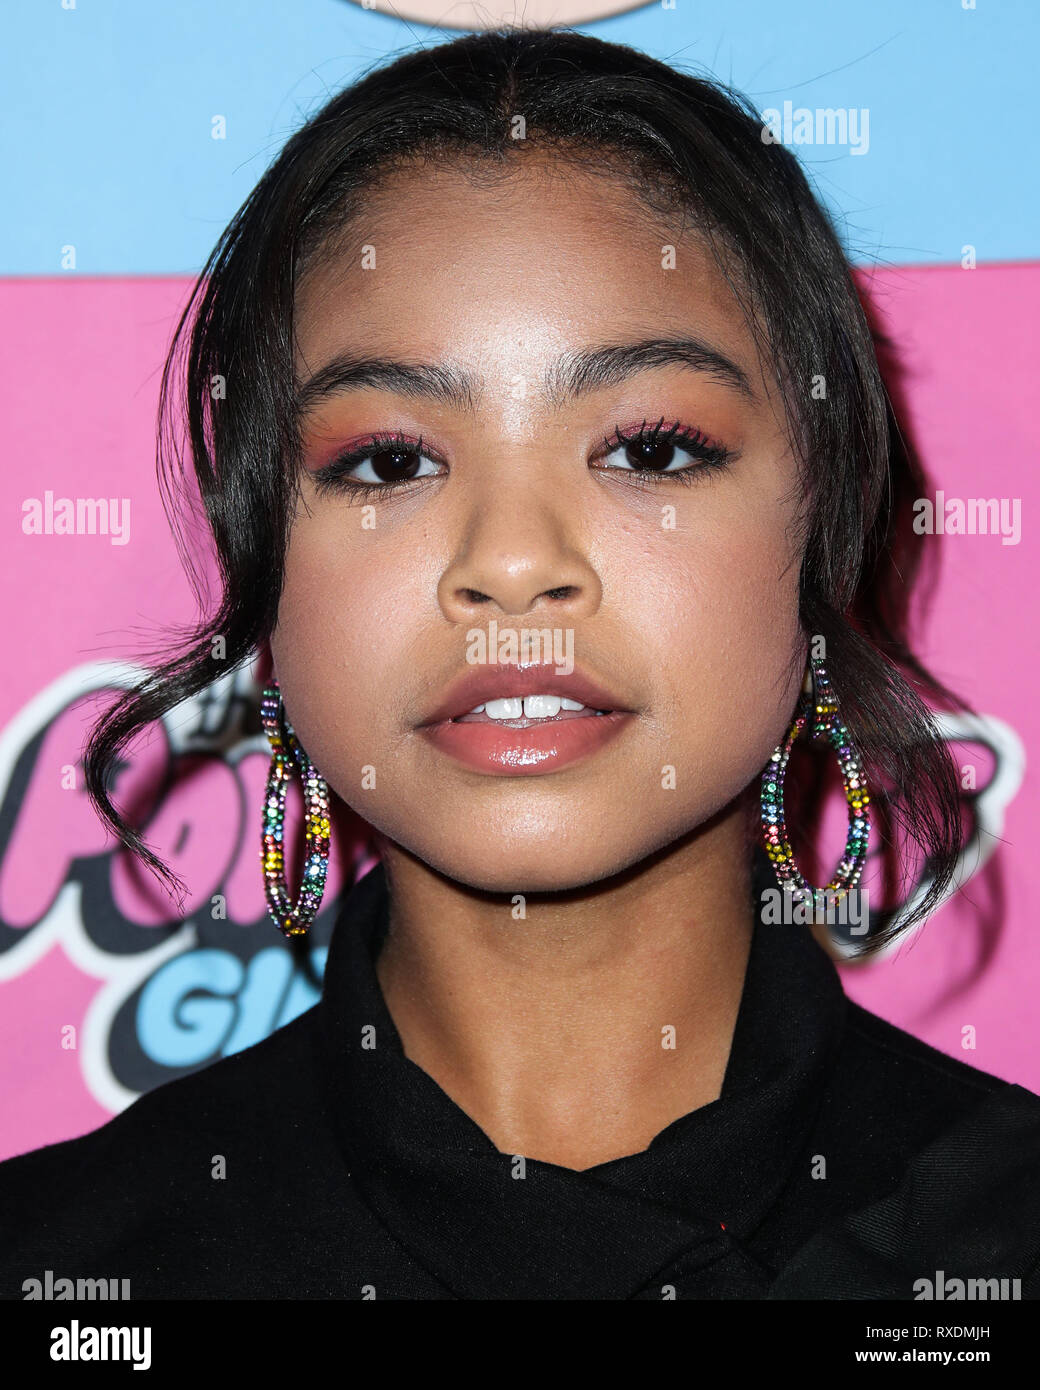 LOS ANGELES, CA, USA - MARCH 08: Actress Navia Robinson arrives at the Christian Cowan x The Powerpuff Girls Runway Show held at the City Market Social House on March 8, 2019 in Los Angeles, California, United States. (Photo by Xavier Collin/Image Press Agency) Stock Photo